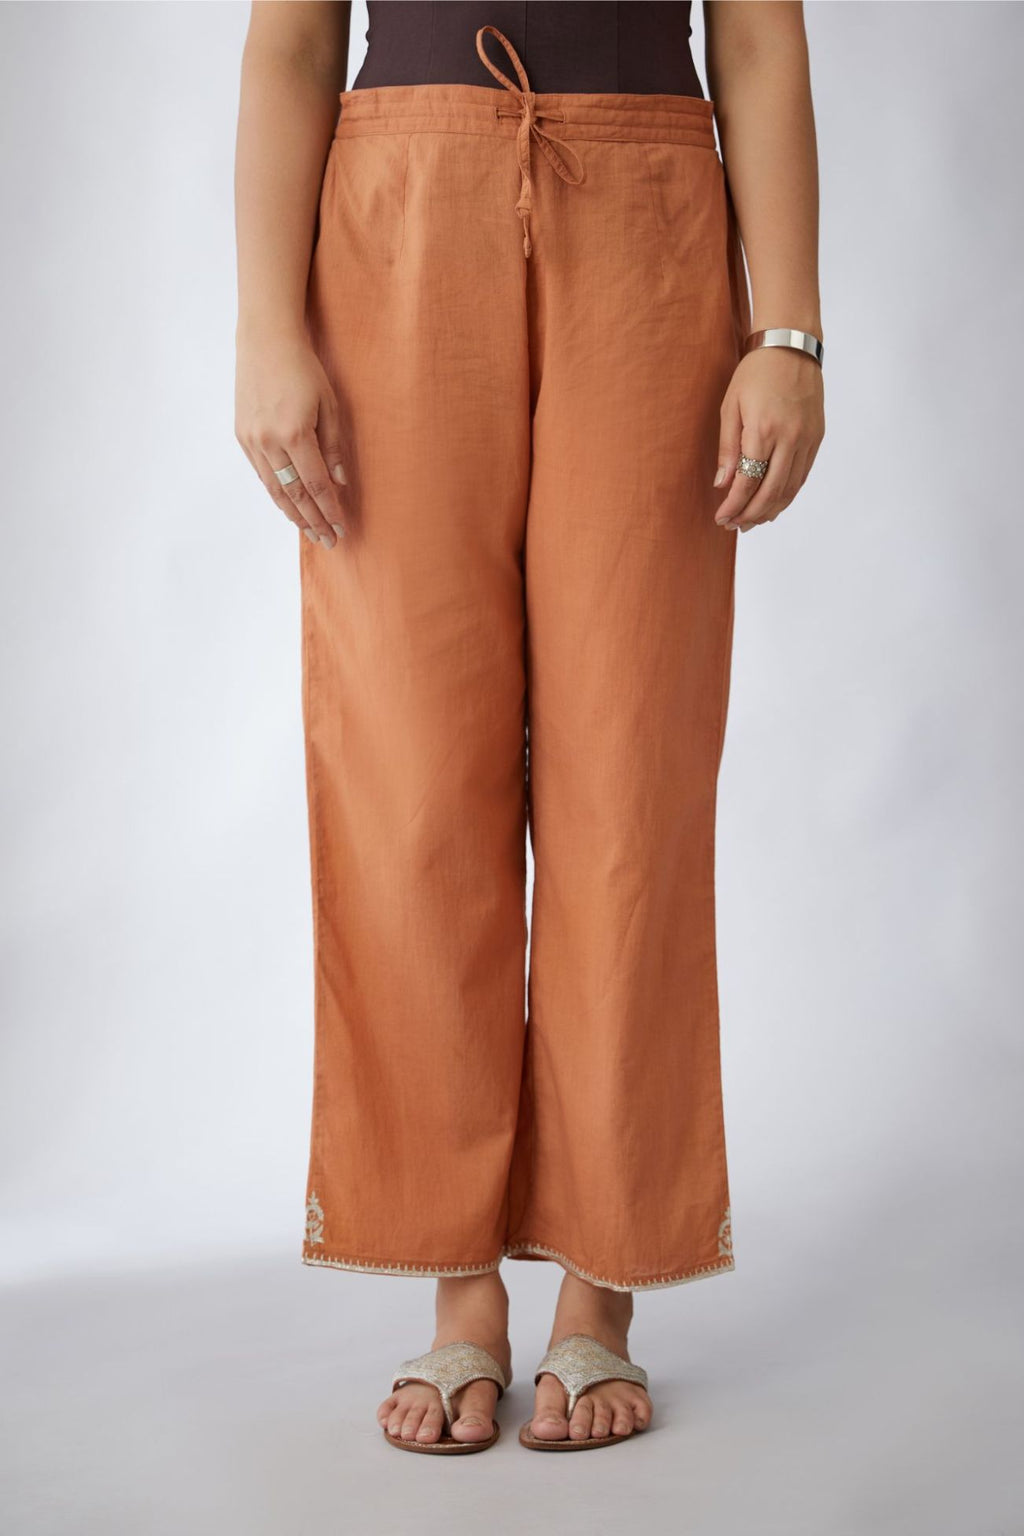 Copper cotton straight pants with silver embroidery detailing at bottom hem (Pants)